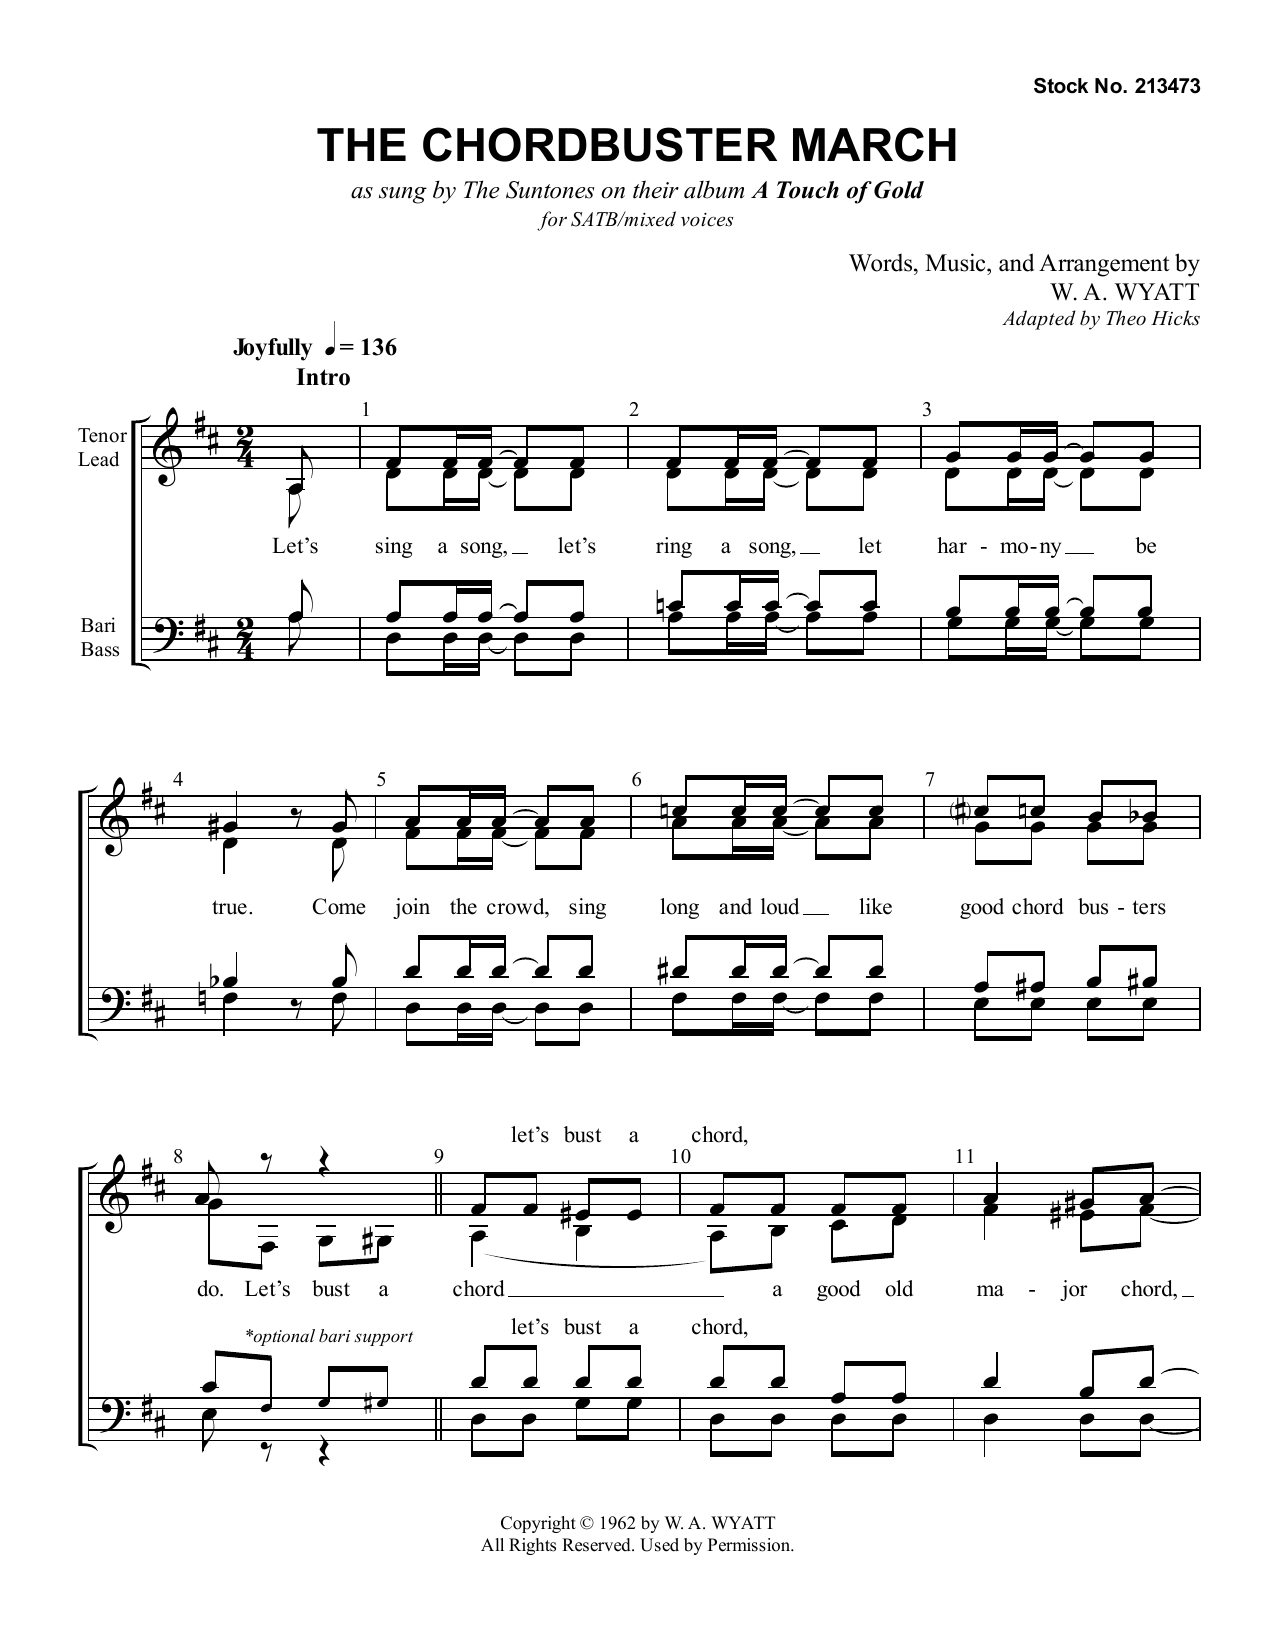 Download The Suntones The Chordbuster March Sheet Music